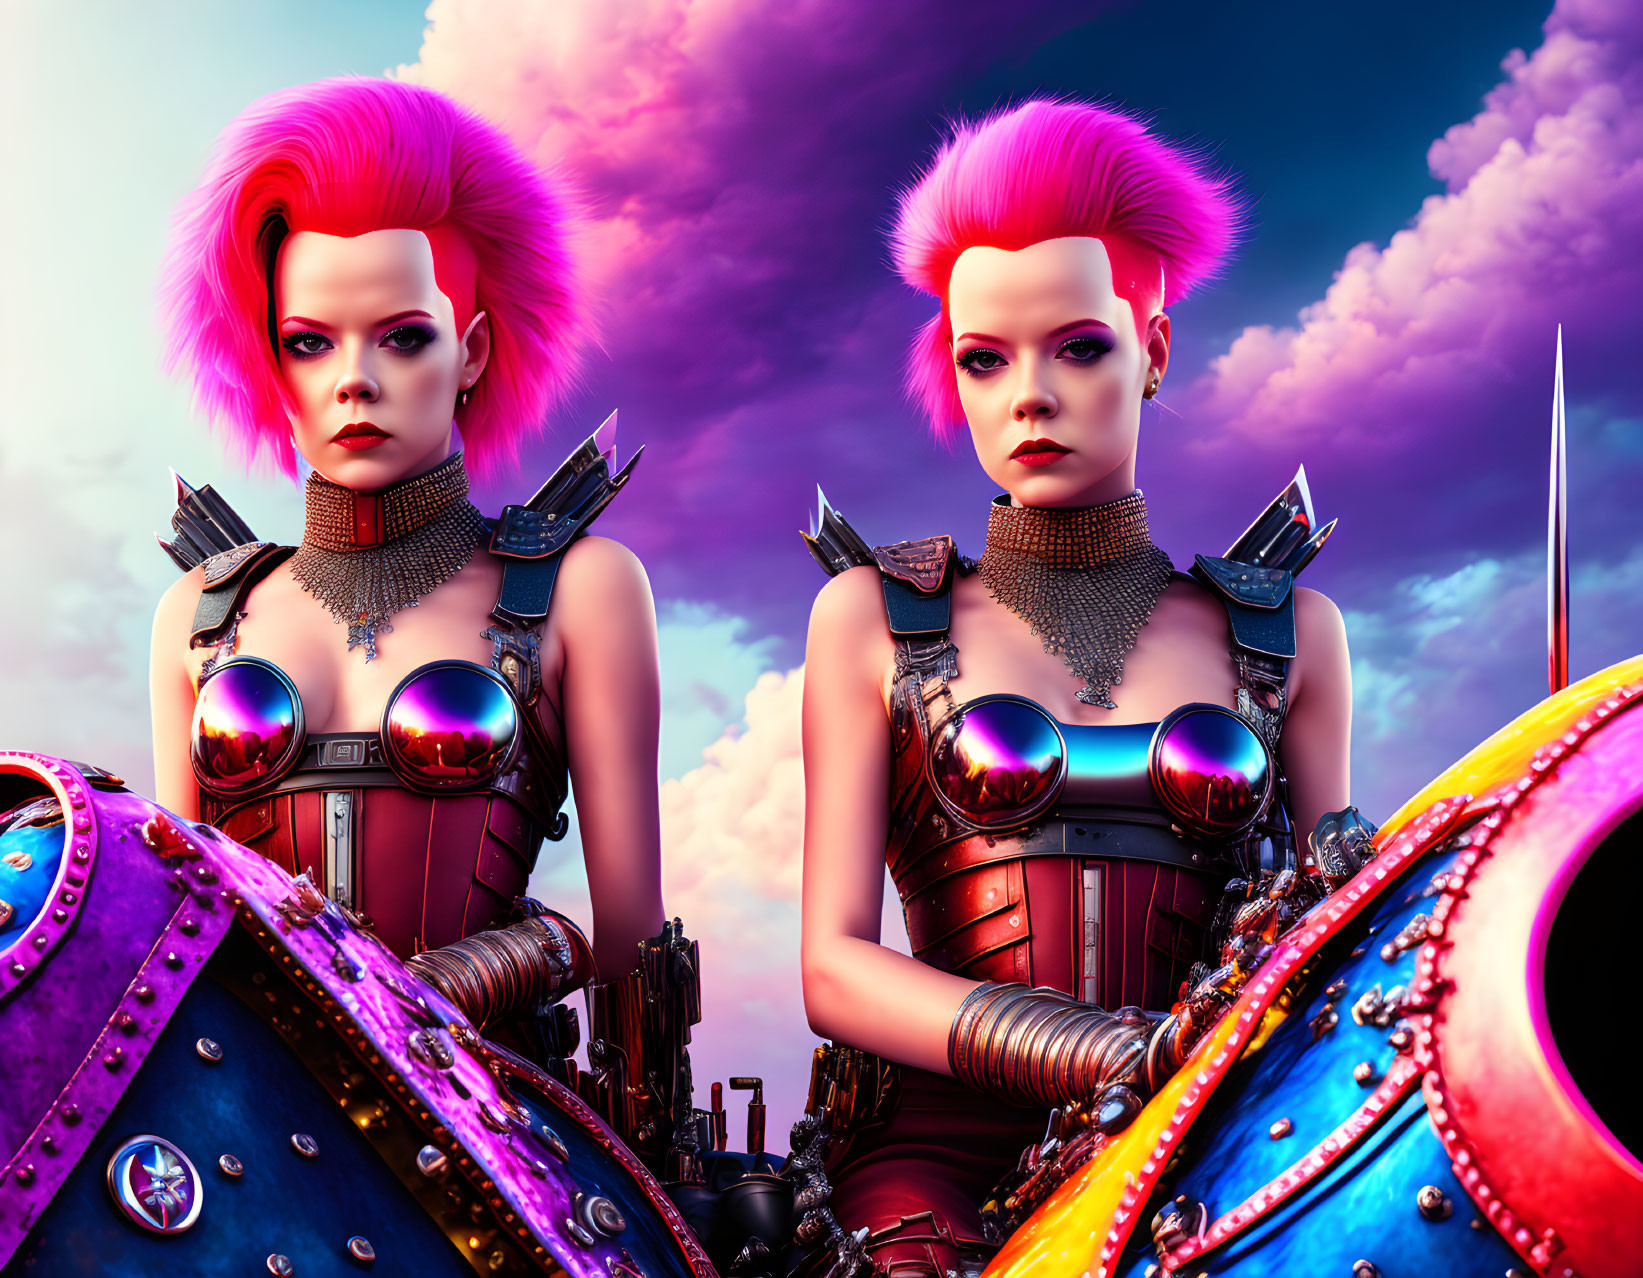 Futuristic female warriors in pink mohawks, metallic armor, and weapons